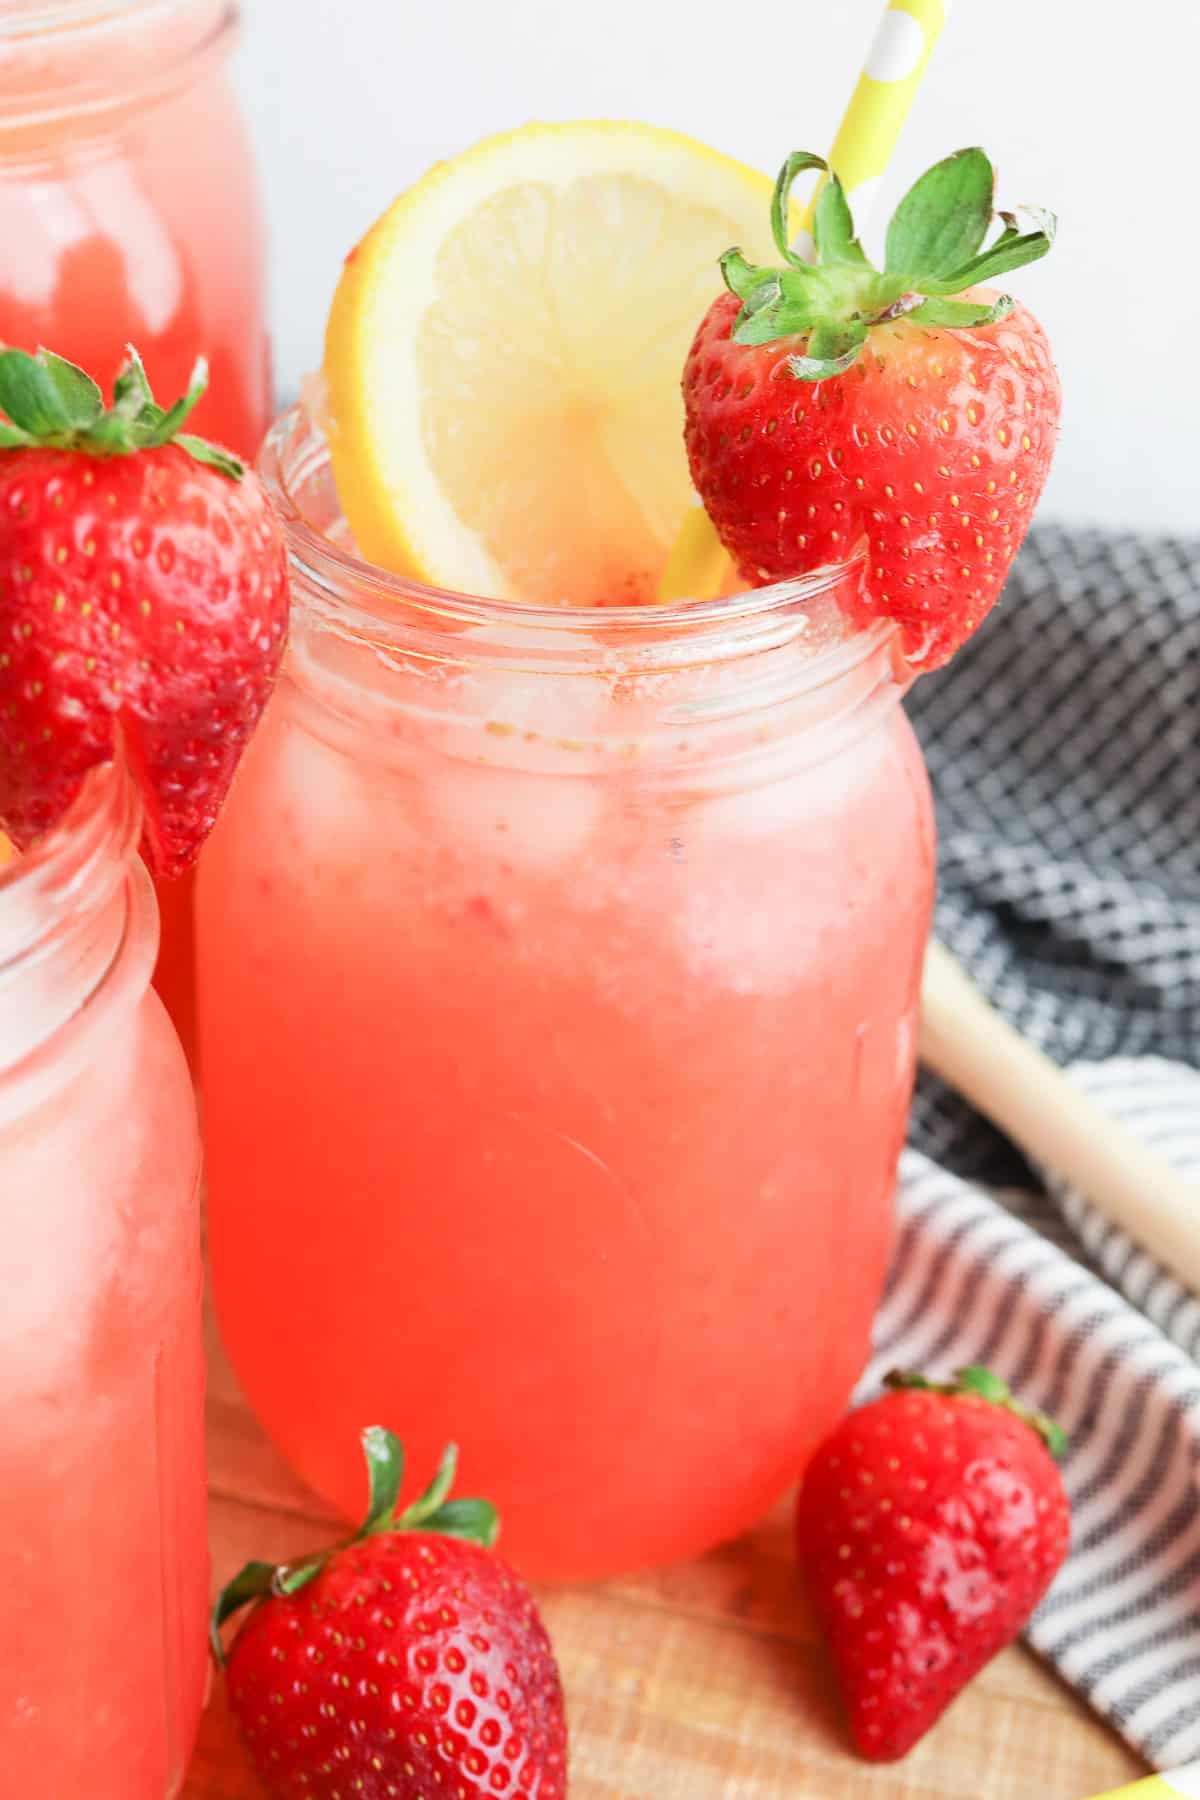 Up close view of a single glass of strawberry lemonade with more fresh strawberries on and next to the glass.